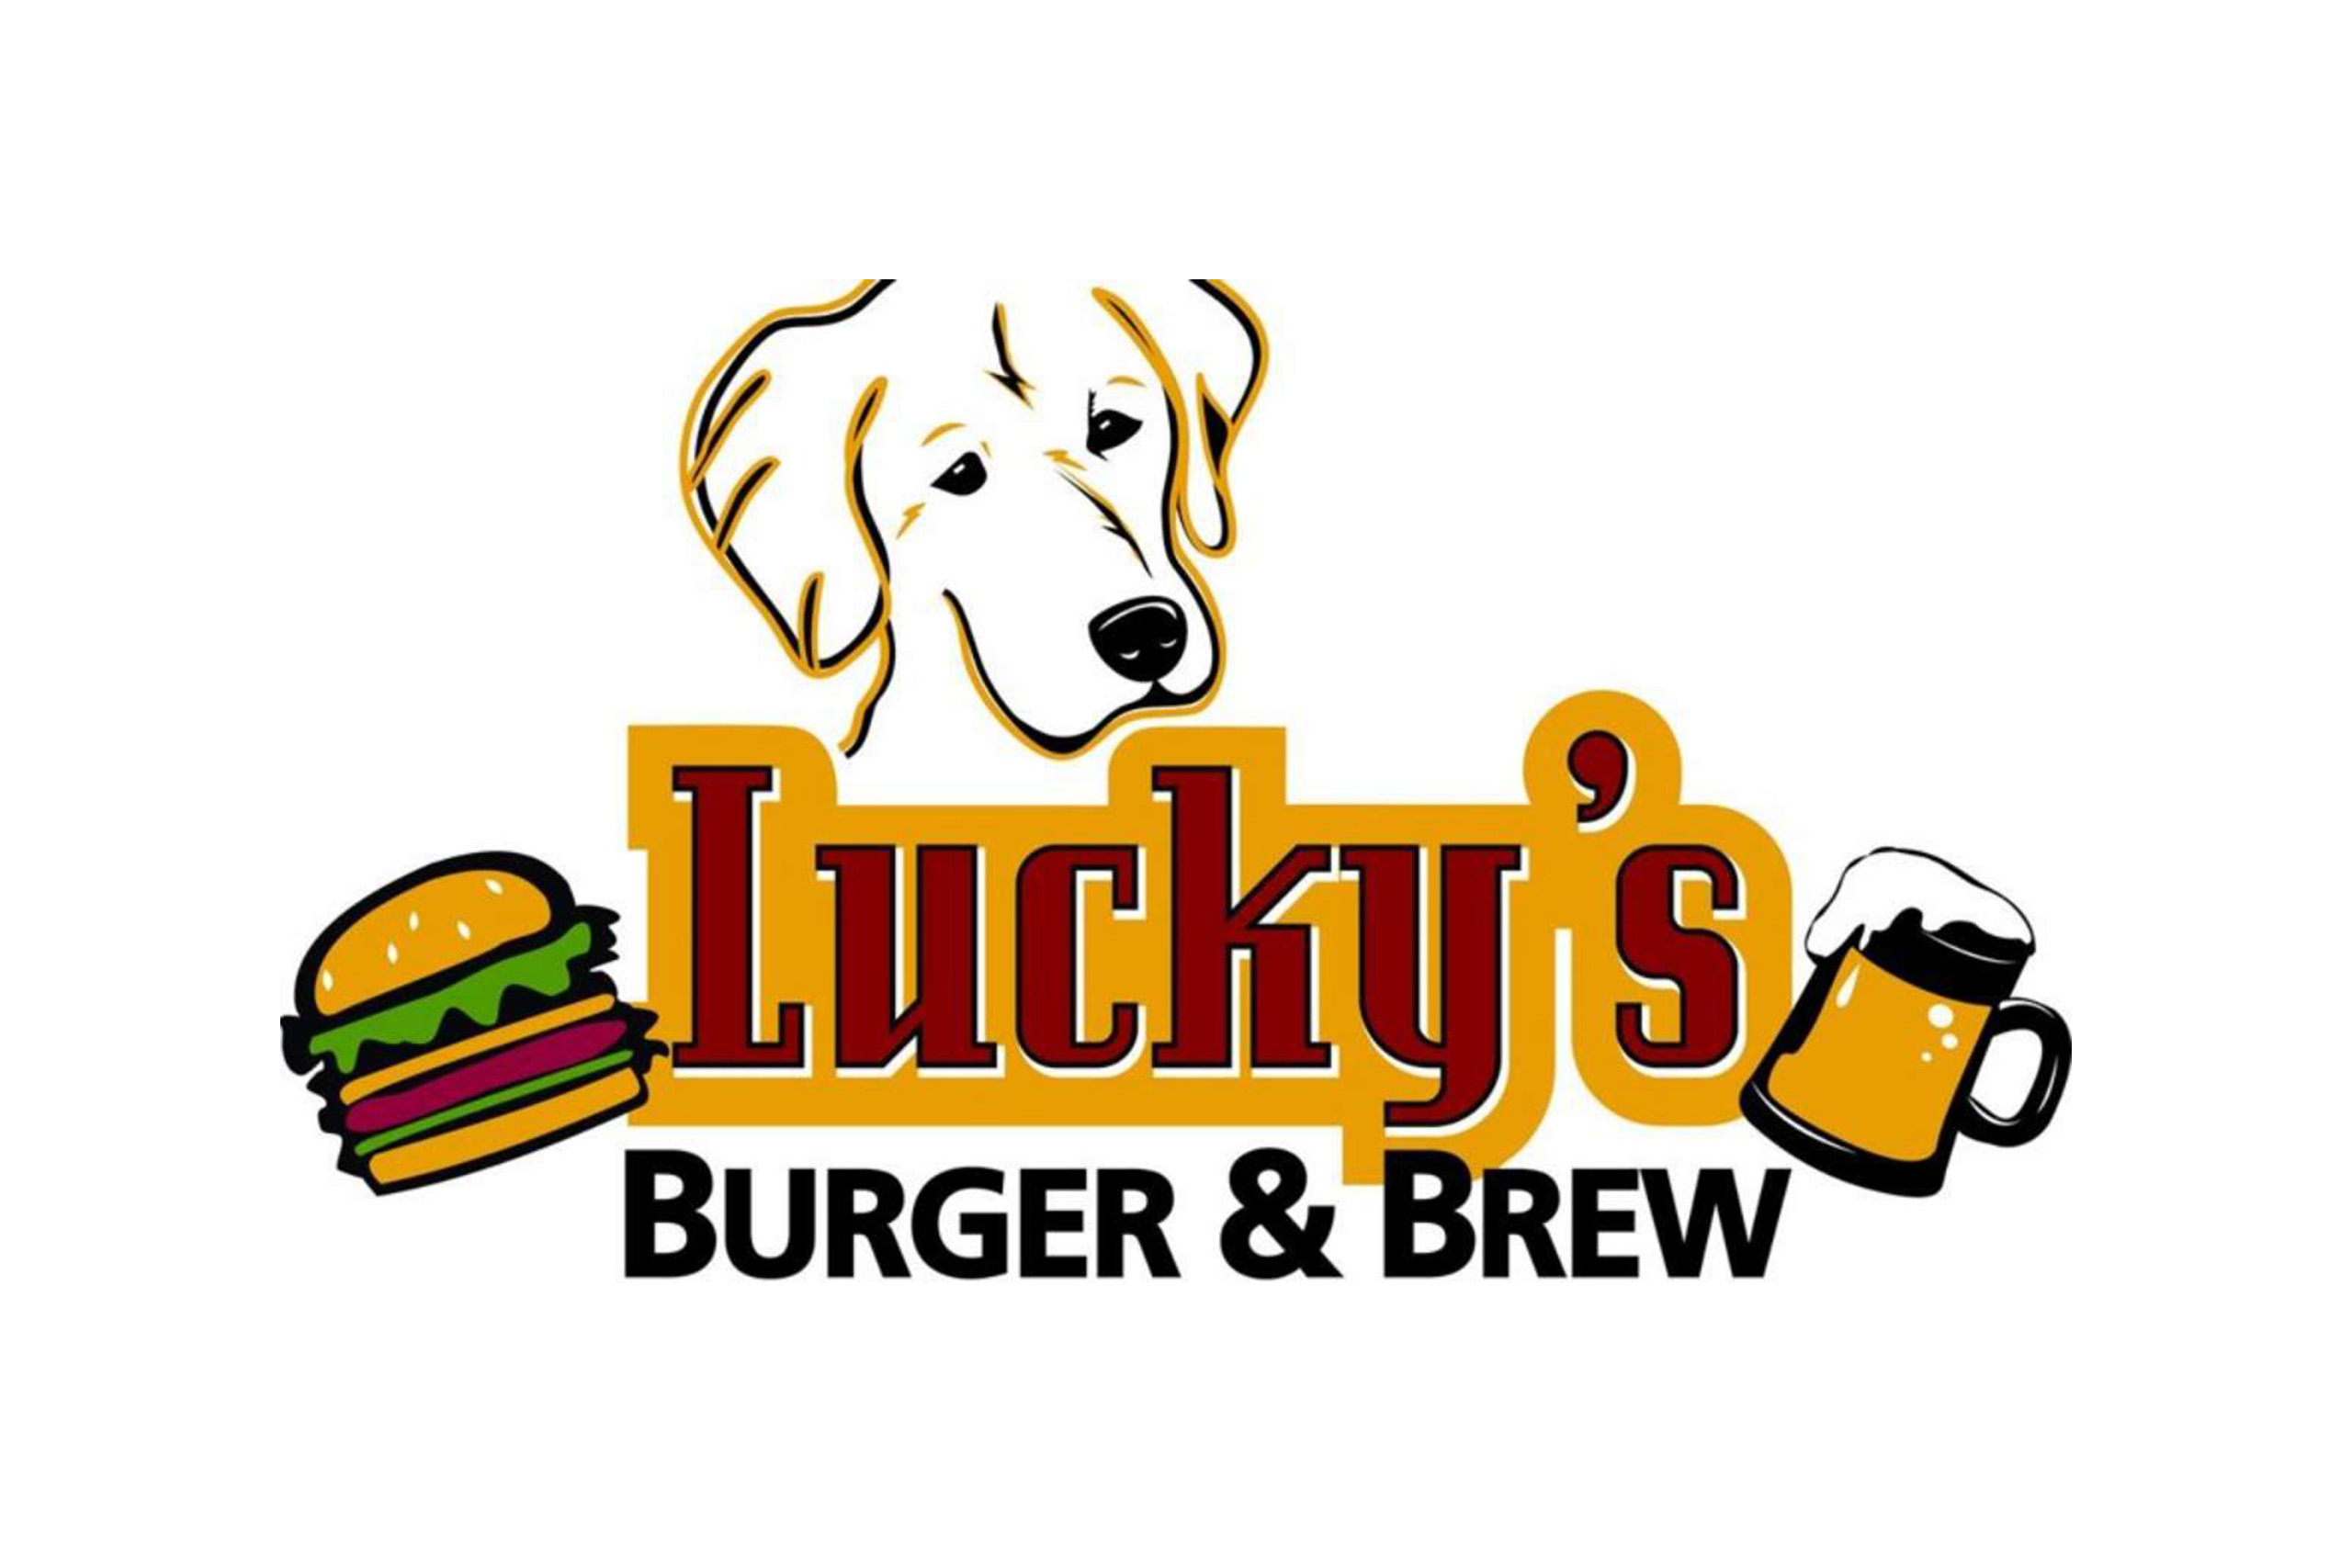 Lucky's Burger & Brew Logo - Your gateway to affordable dining near Marietta Square and delightful food experiences.